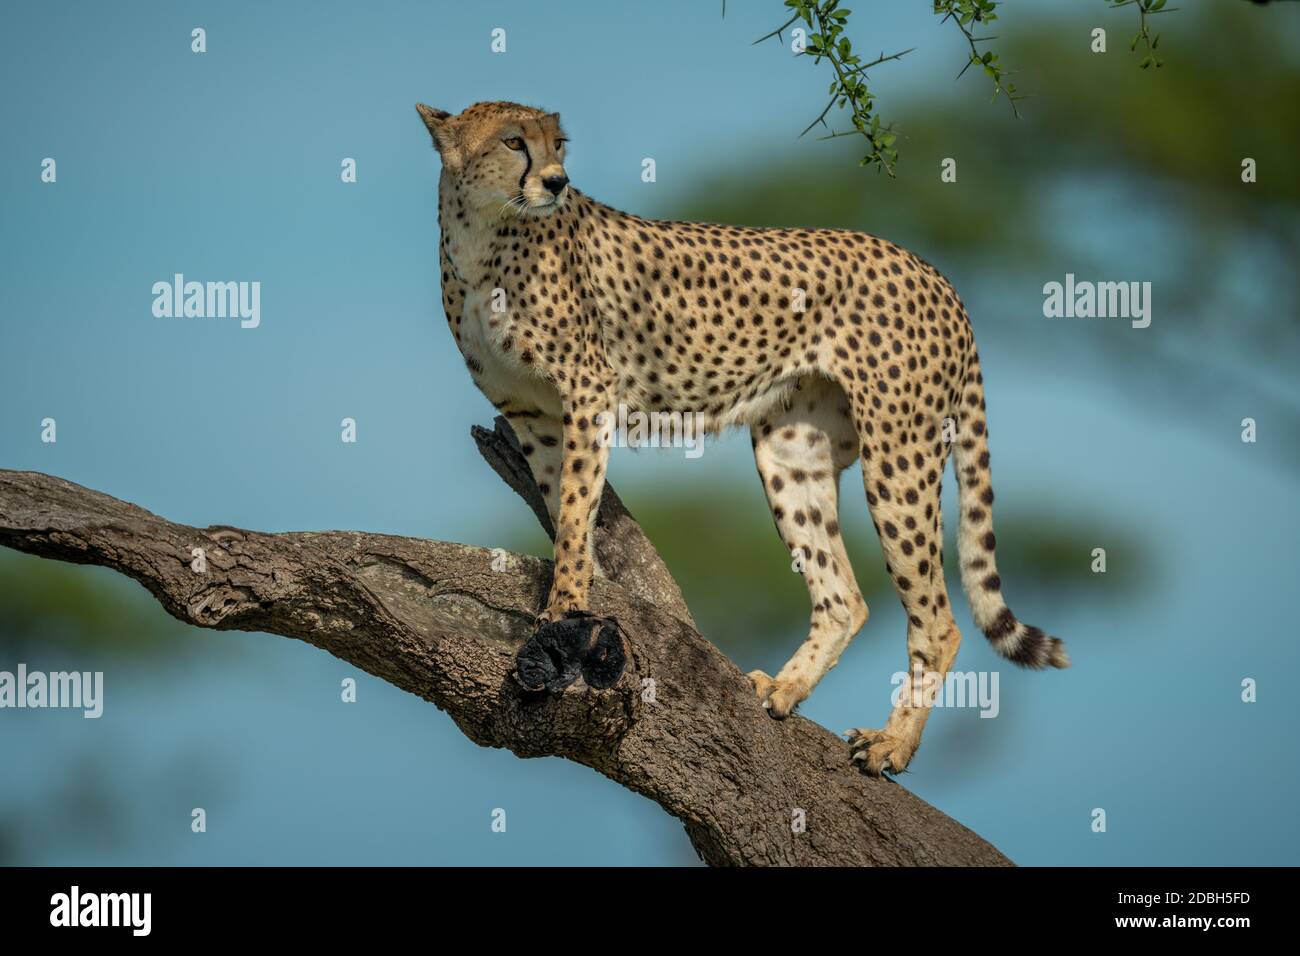 Cheetah stands on branch turning head right Stock Photo